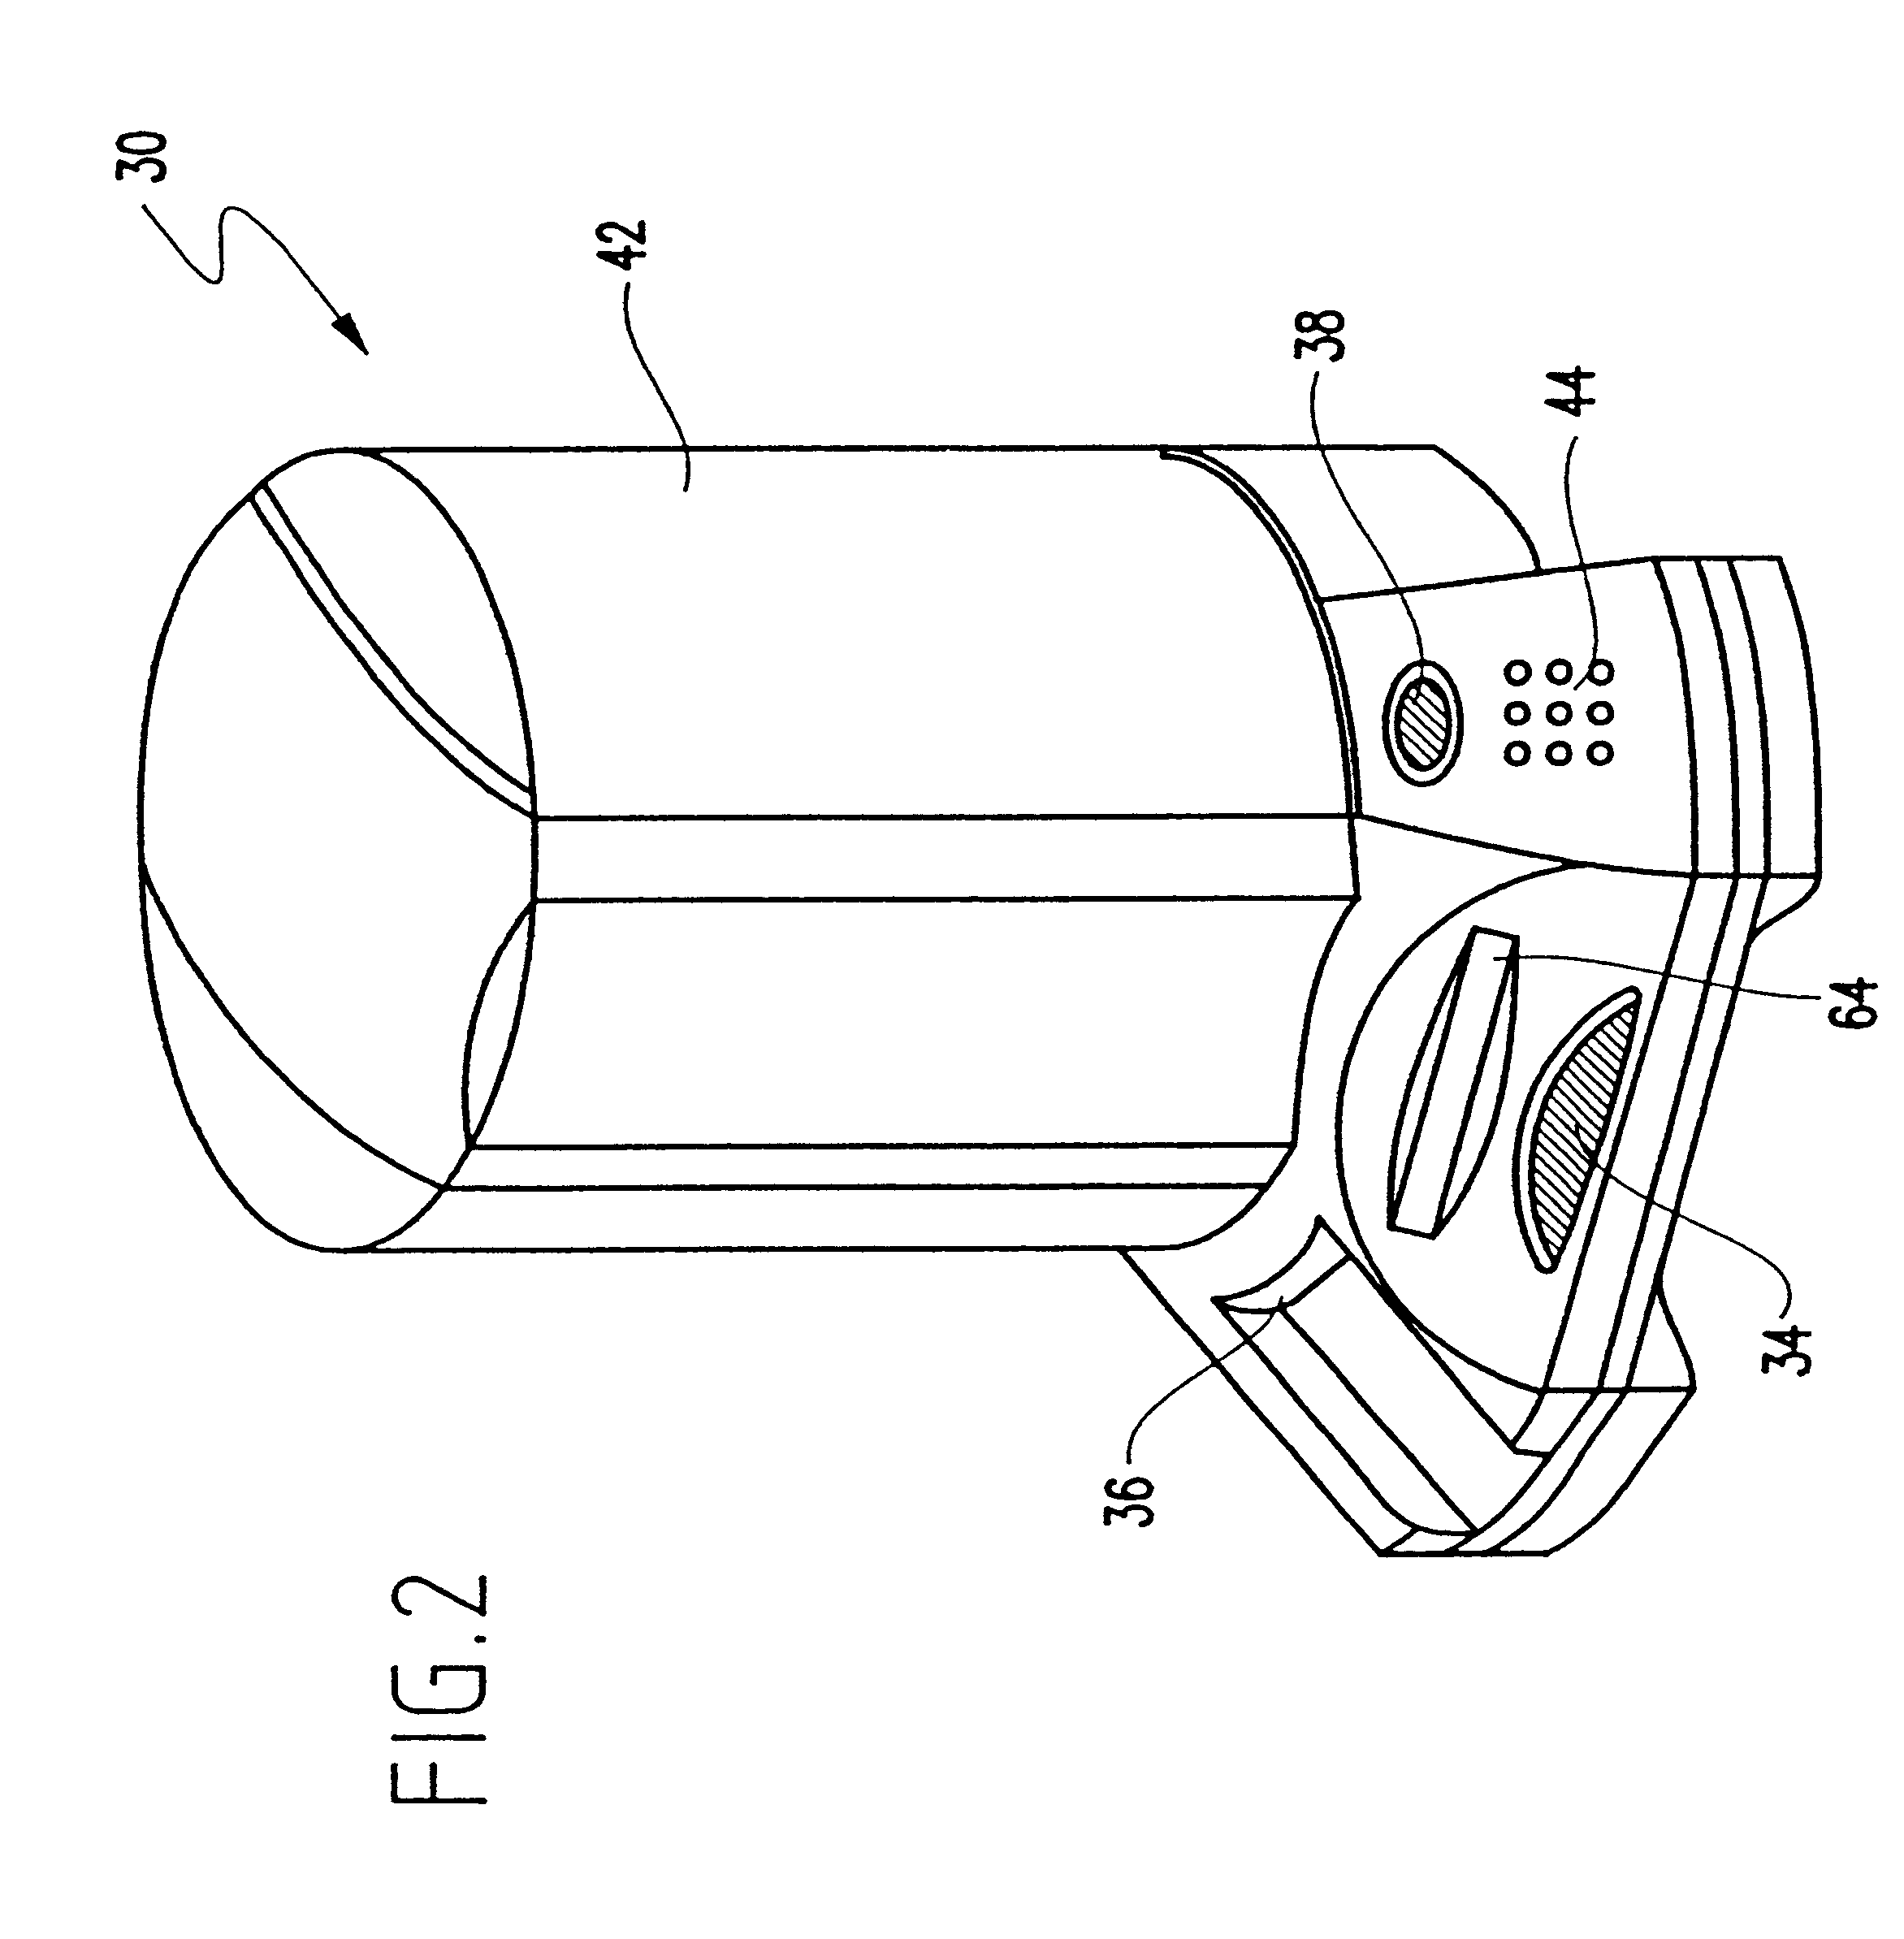 Apparatus and method for medication dispensing and messaging